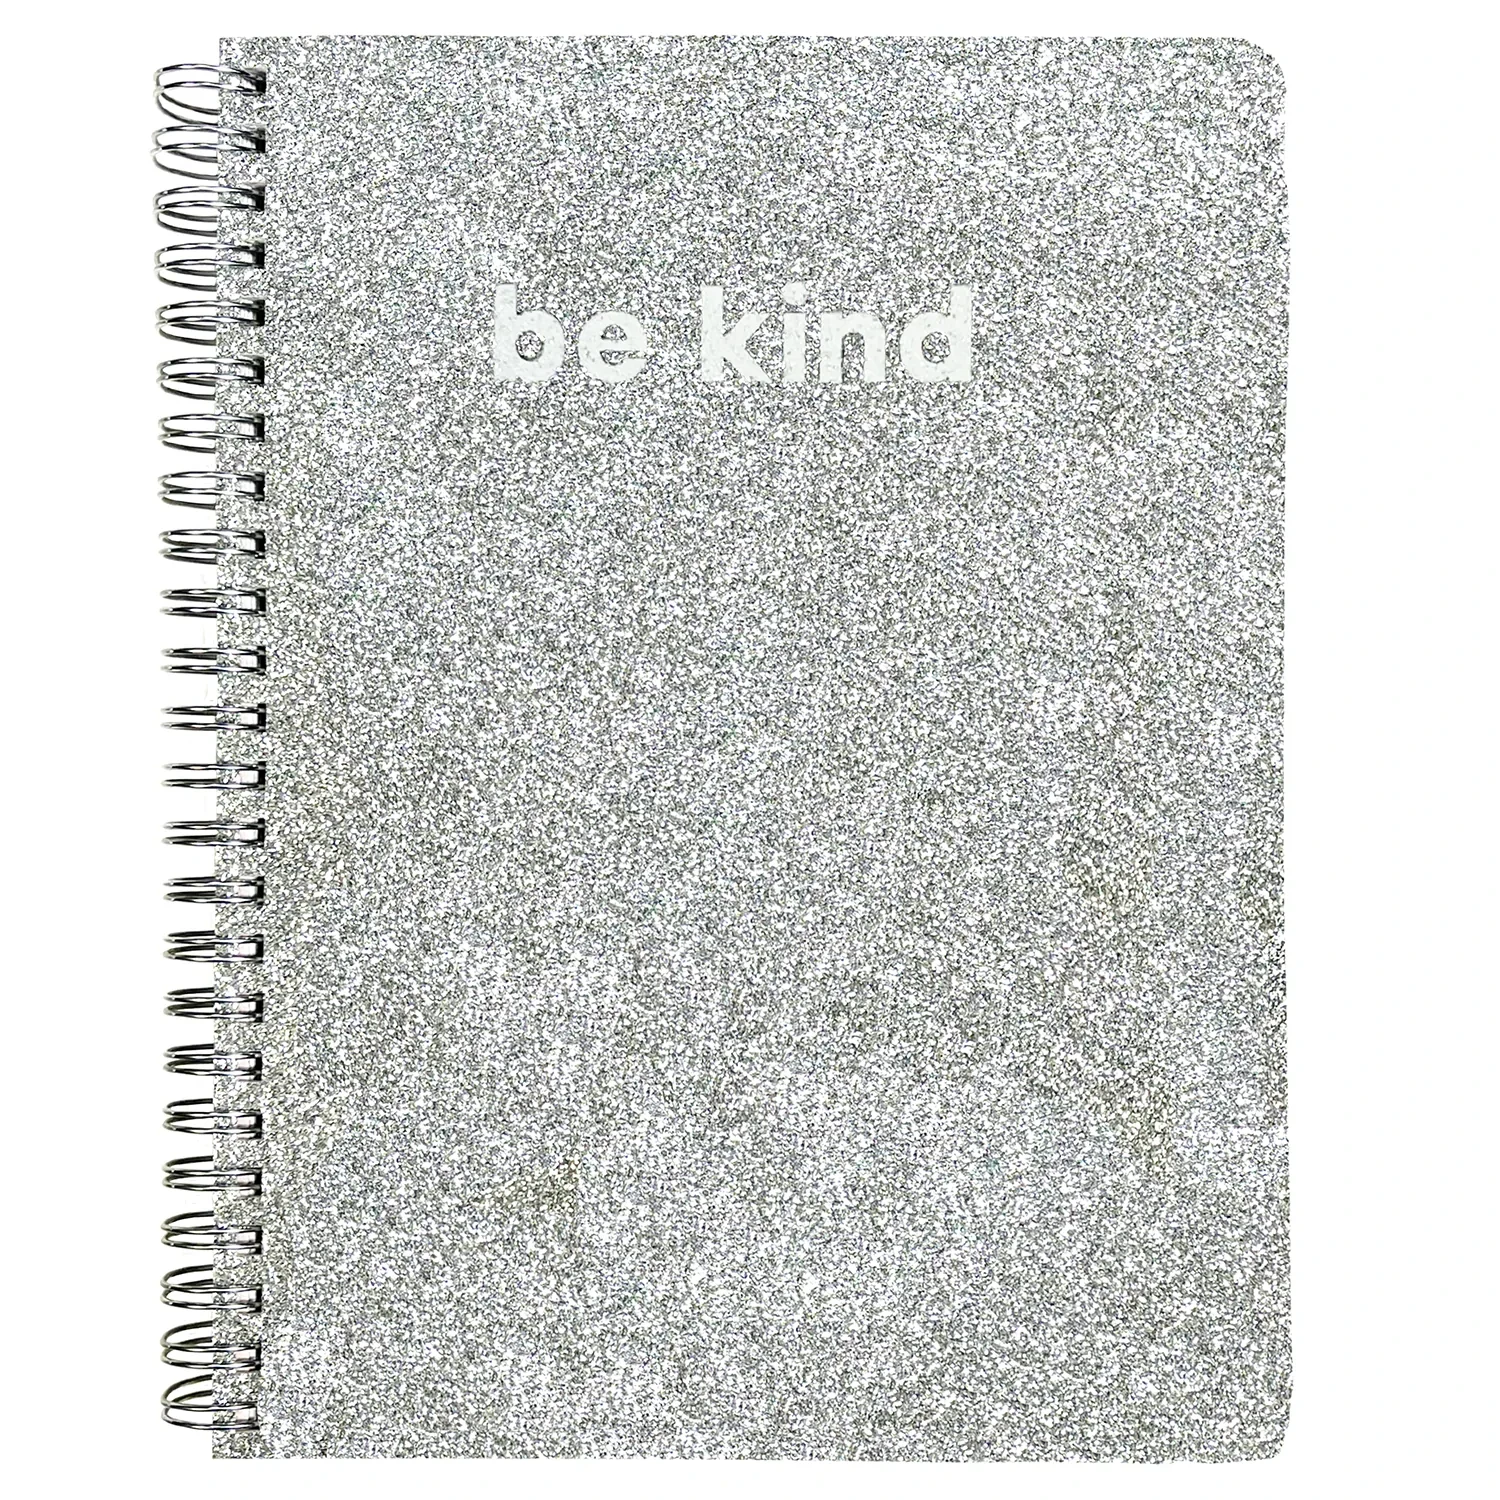 Steel Mill Cute Lined Notebook with pocket, Silver Glitter, 6" x 8.25", BE KIND